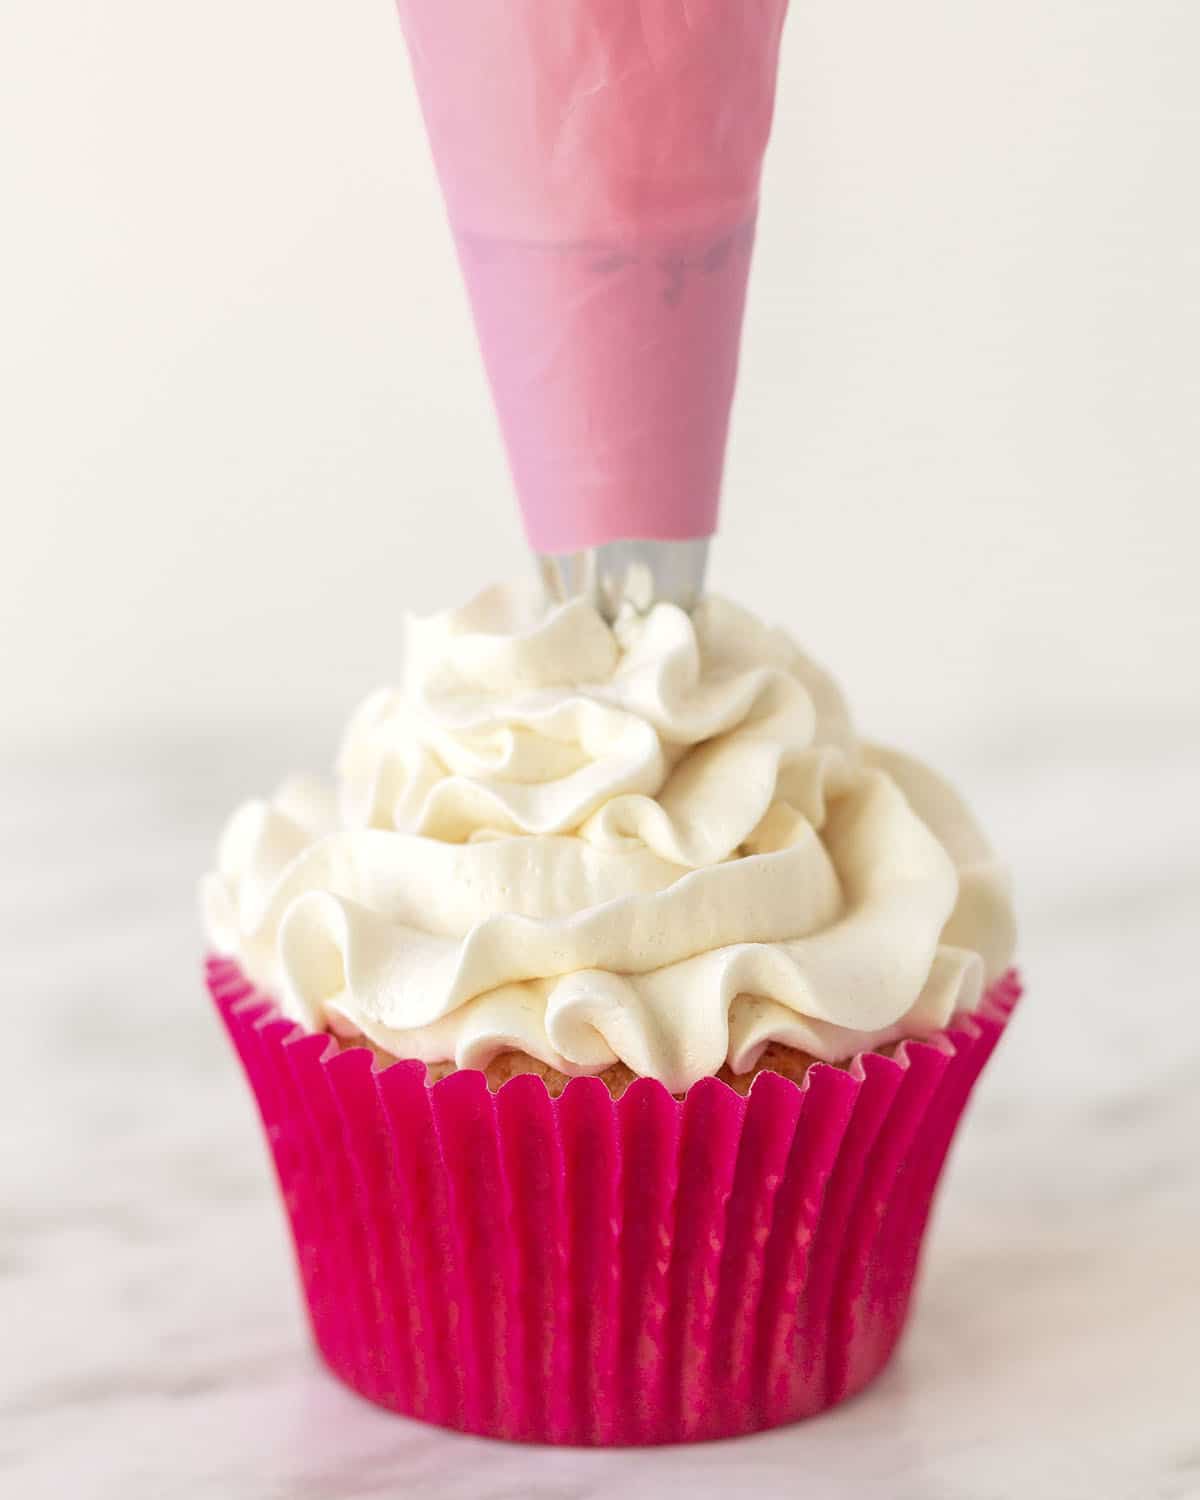 Image shows vegan buttercream being piped onto a vanilla cupcake.